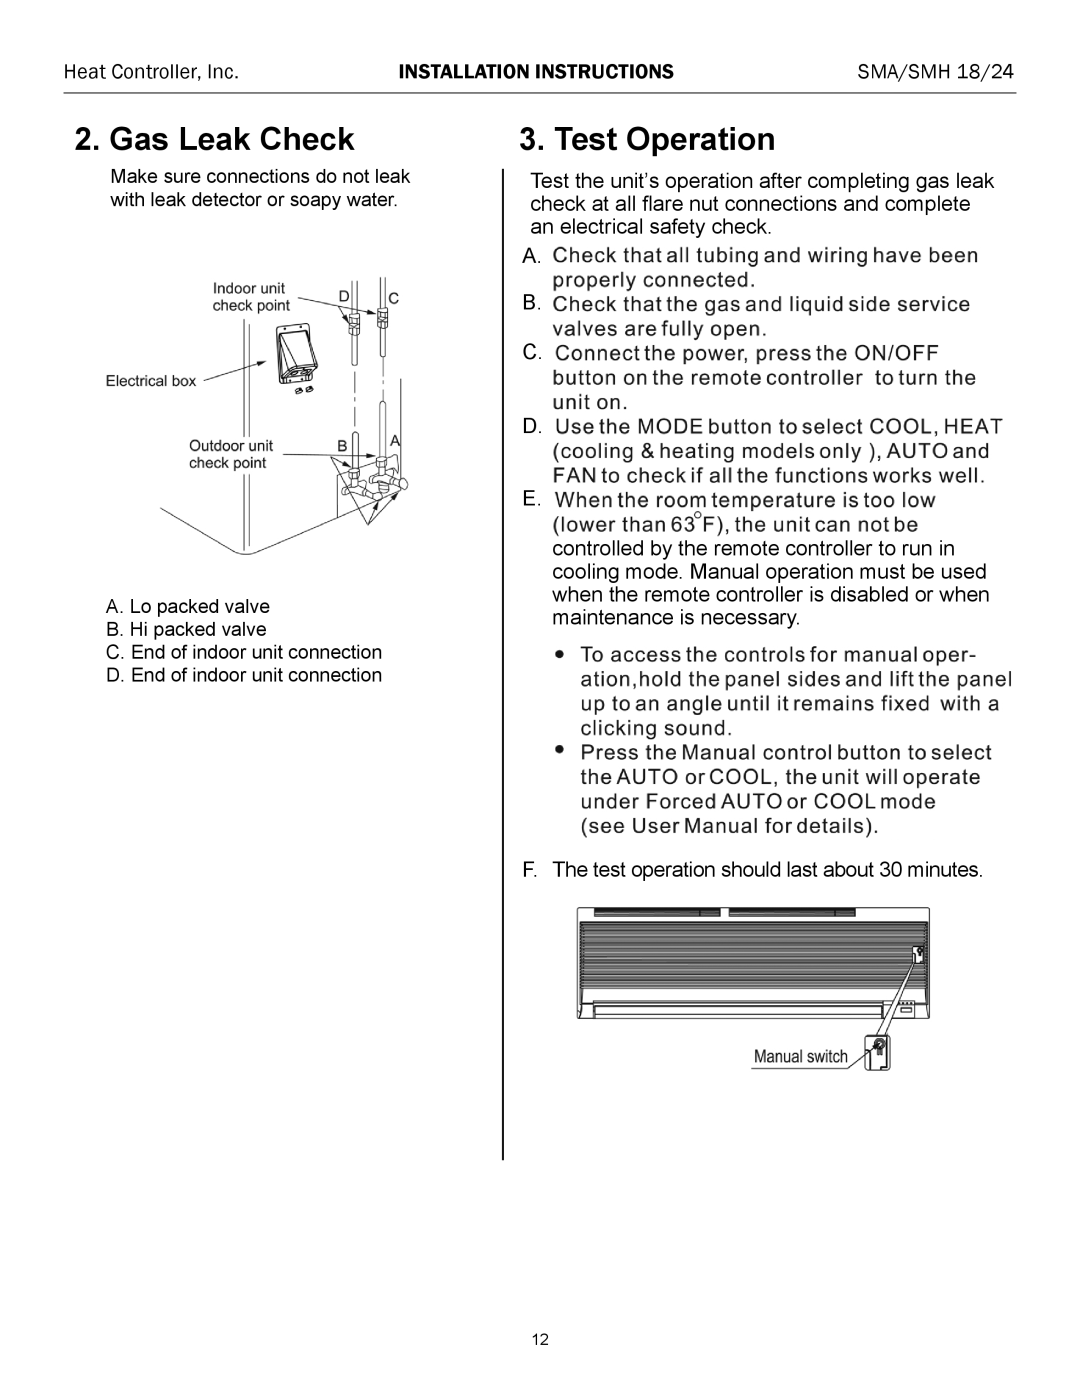 Heat Controller SMA/SMH 18/24 installation instructions Gas Leak Check, Test Operation 